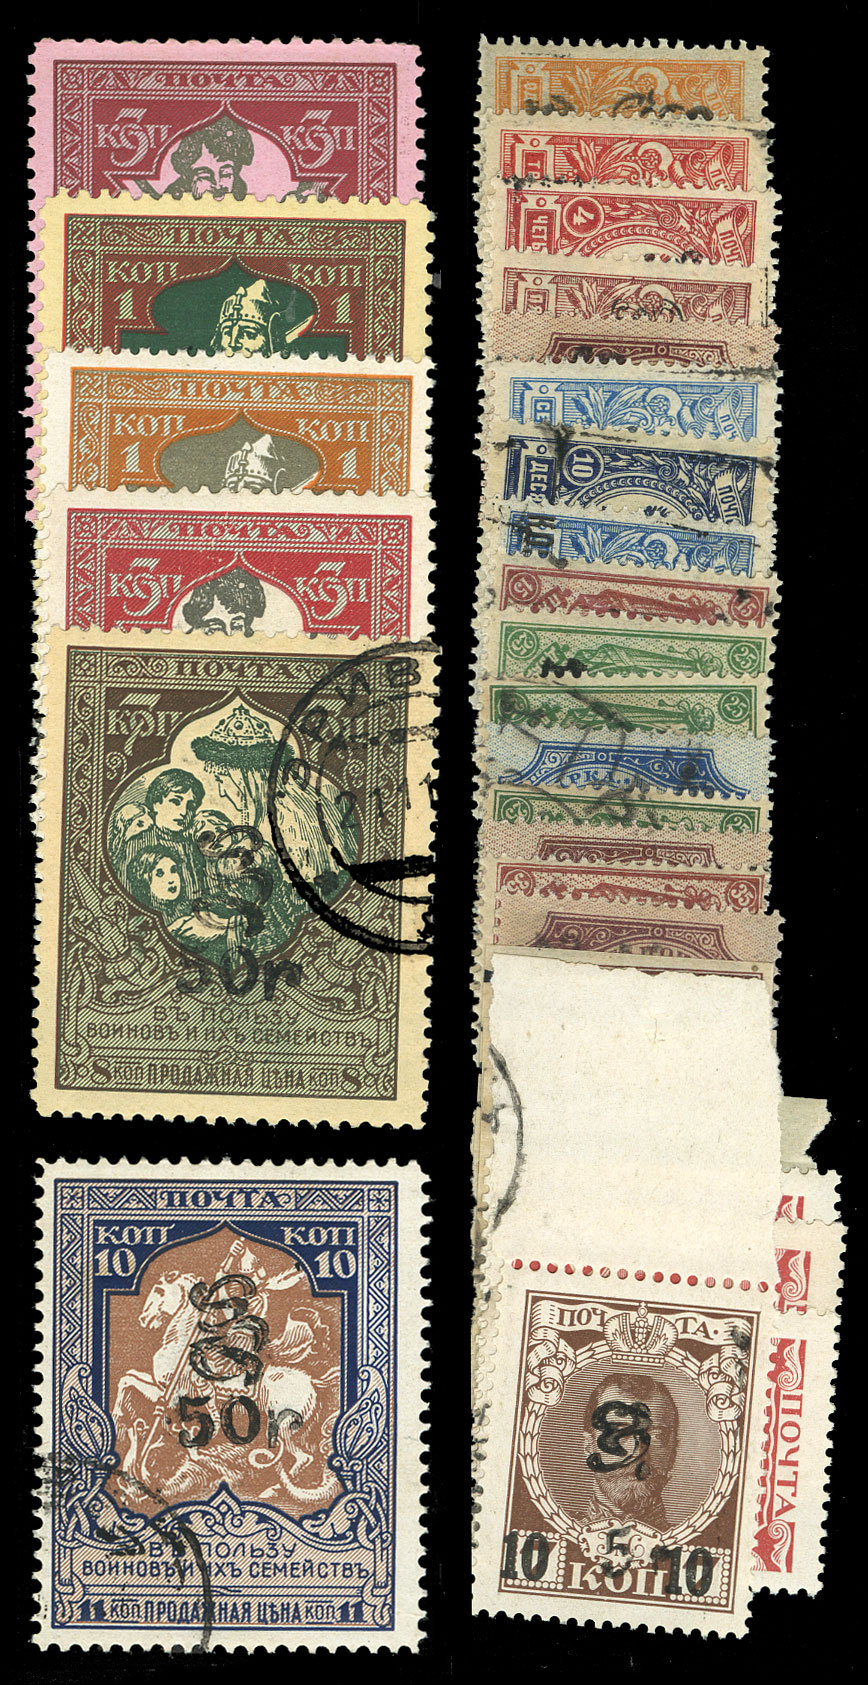 Lot 1406 - LARGE LOTS AND COLLECTIONS FRENCH OFFICES IN THE TURKISH EMPIRE  -  Cherrystone Auctions U.S. & Worldwide Stamps & Postal History